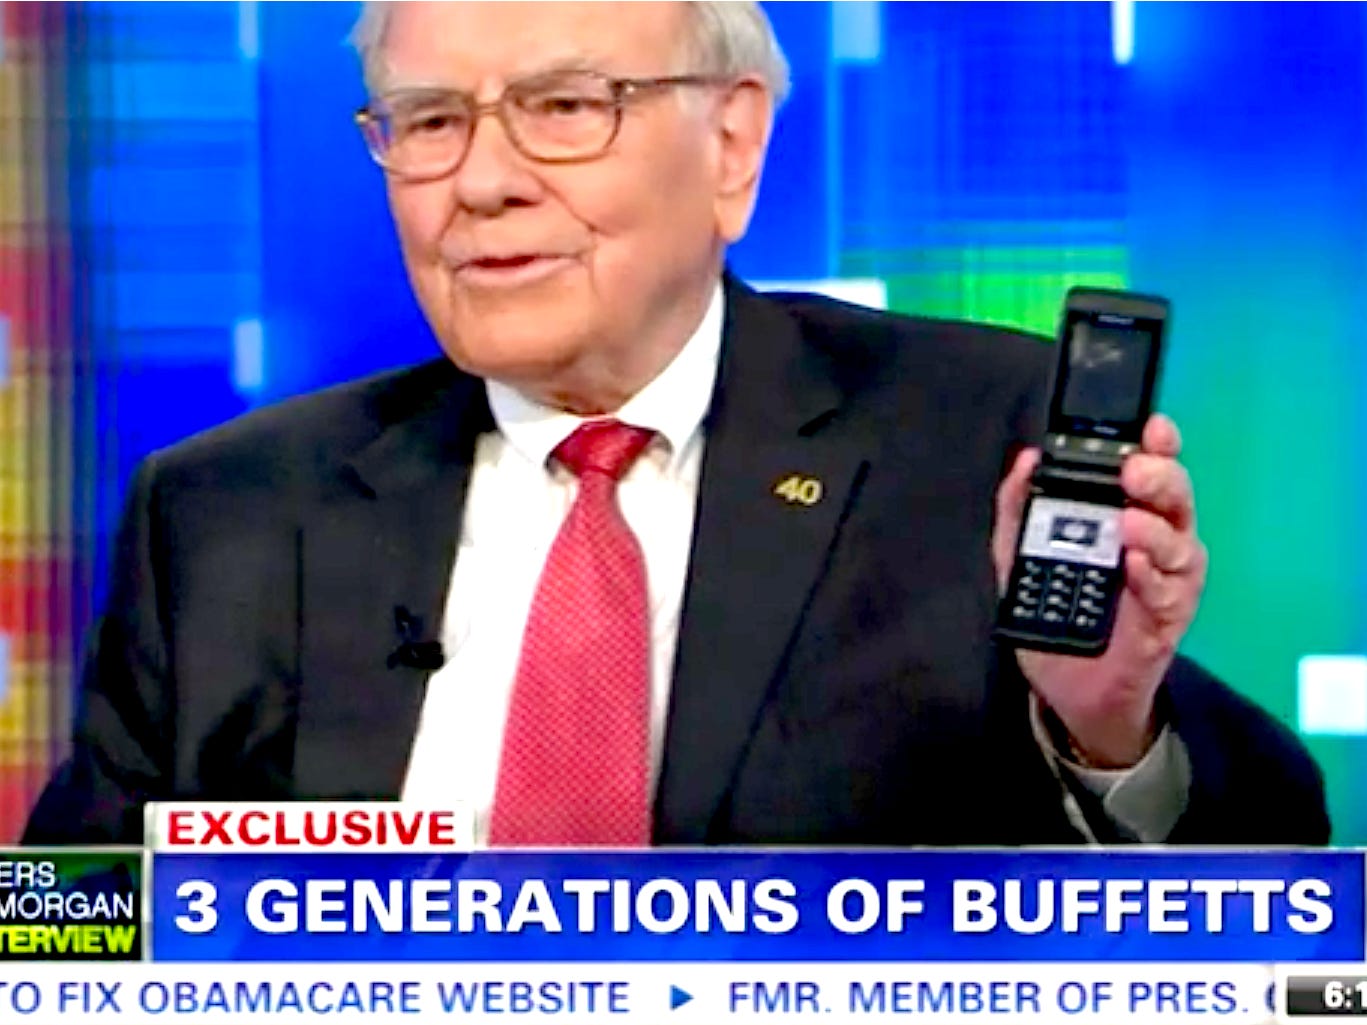 <p>Despite the fact that Berkshire Hathaway is a <a href="https://markets.businessinsider.com/news/stocks/warren-buffett-apple-tech-stock-portfolio-berkshire-hathaway-iphone-cook-2023-5">major Apple shareholde</a>r, Buffett didn't upgrade to a smart phone until 2020. Before that he preferred the Samsung SCH-U320, which can be bought on eBay for under $20. Though he did make the switch to an iPhone eventually, he told <a href="https://www.cnbc.com/2020/02/24/apple-investor-warren-buffett-traded-in-his-flip-phone-for-an-iphone.html" rel="noopener">CNBC</a> that he just uses it "as a phone."</p>